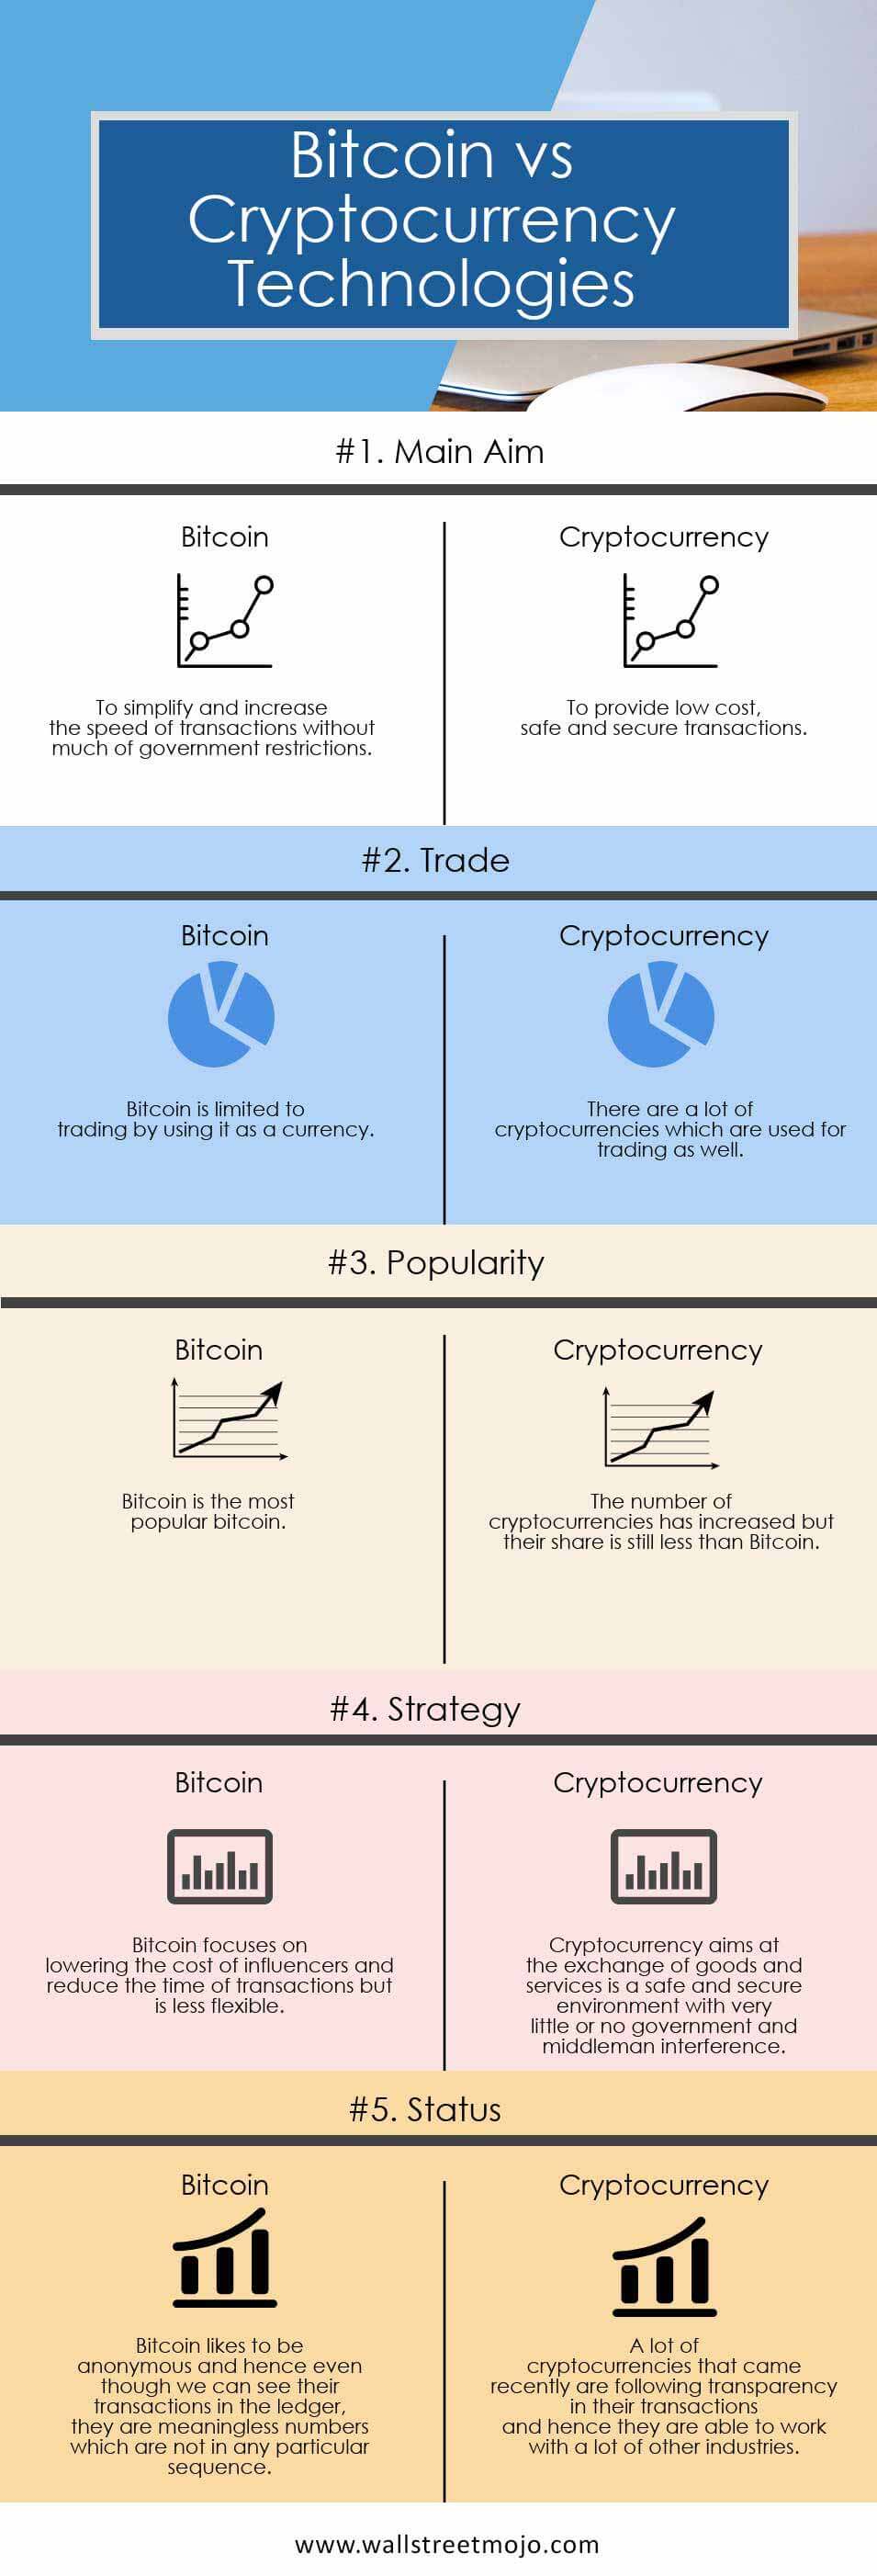 bitcoins and cryptocurrency explained